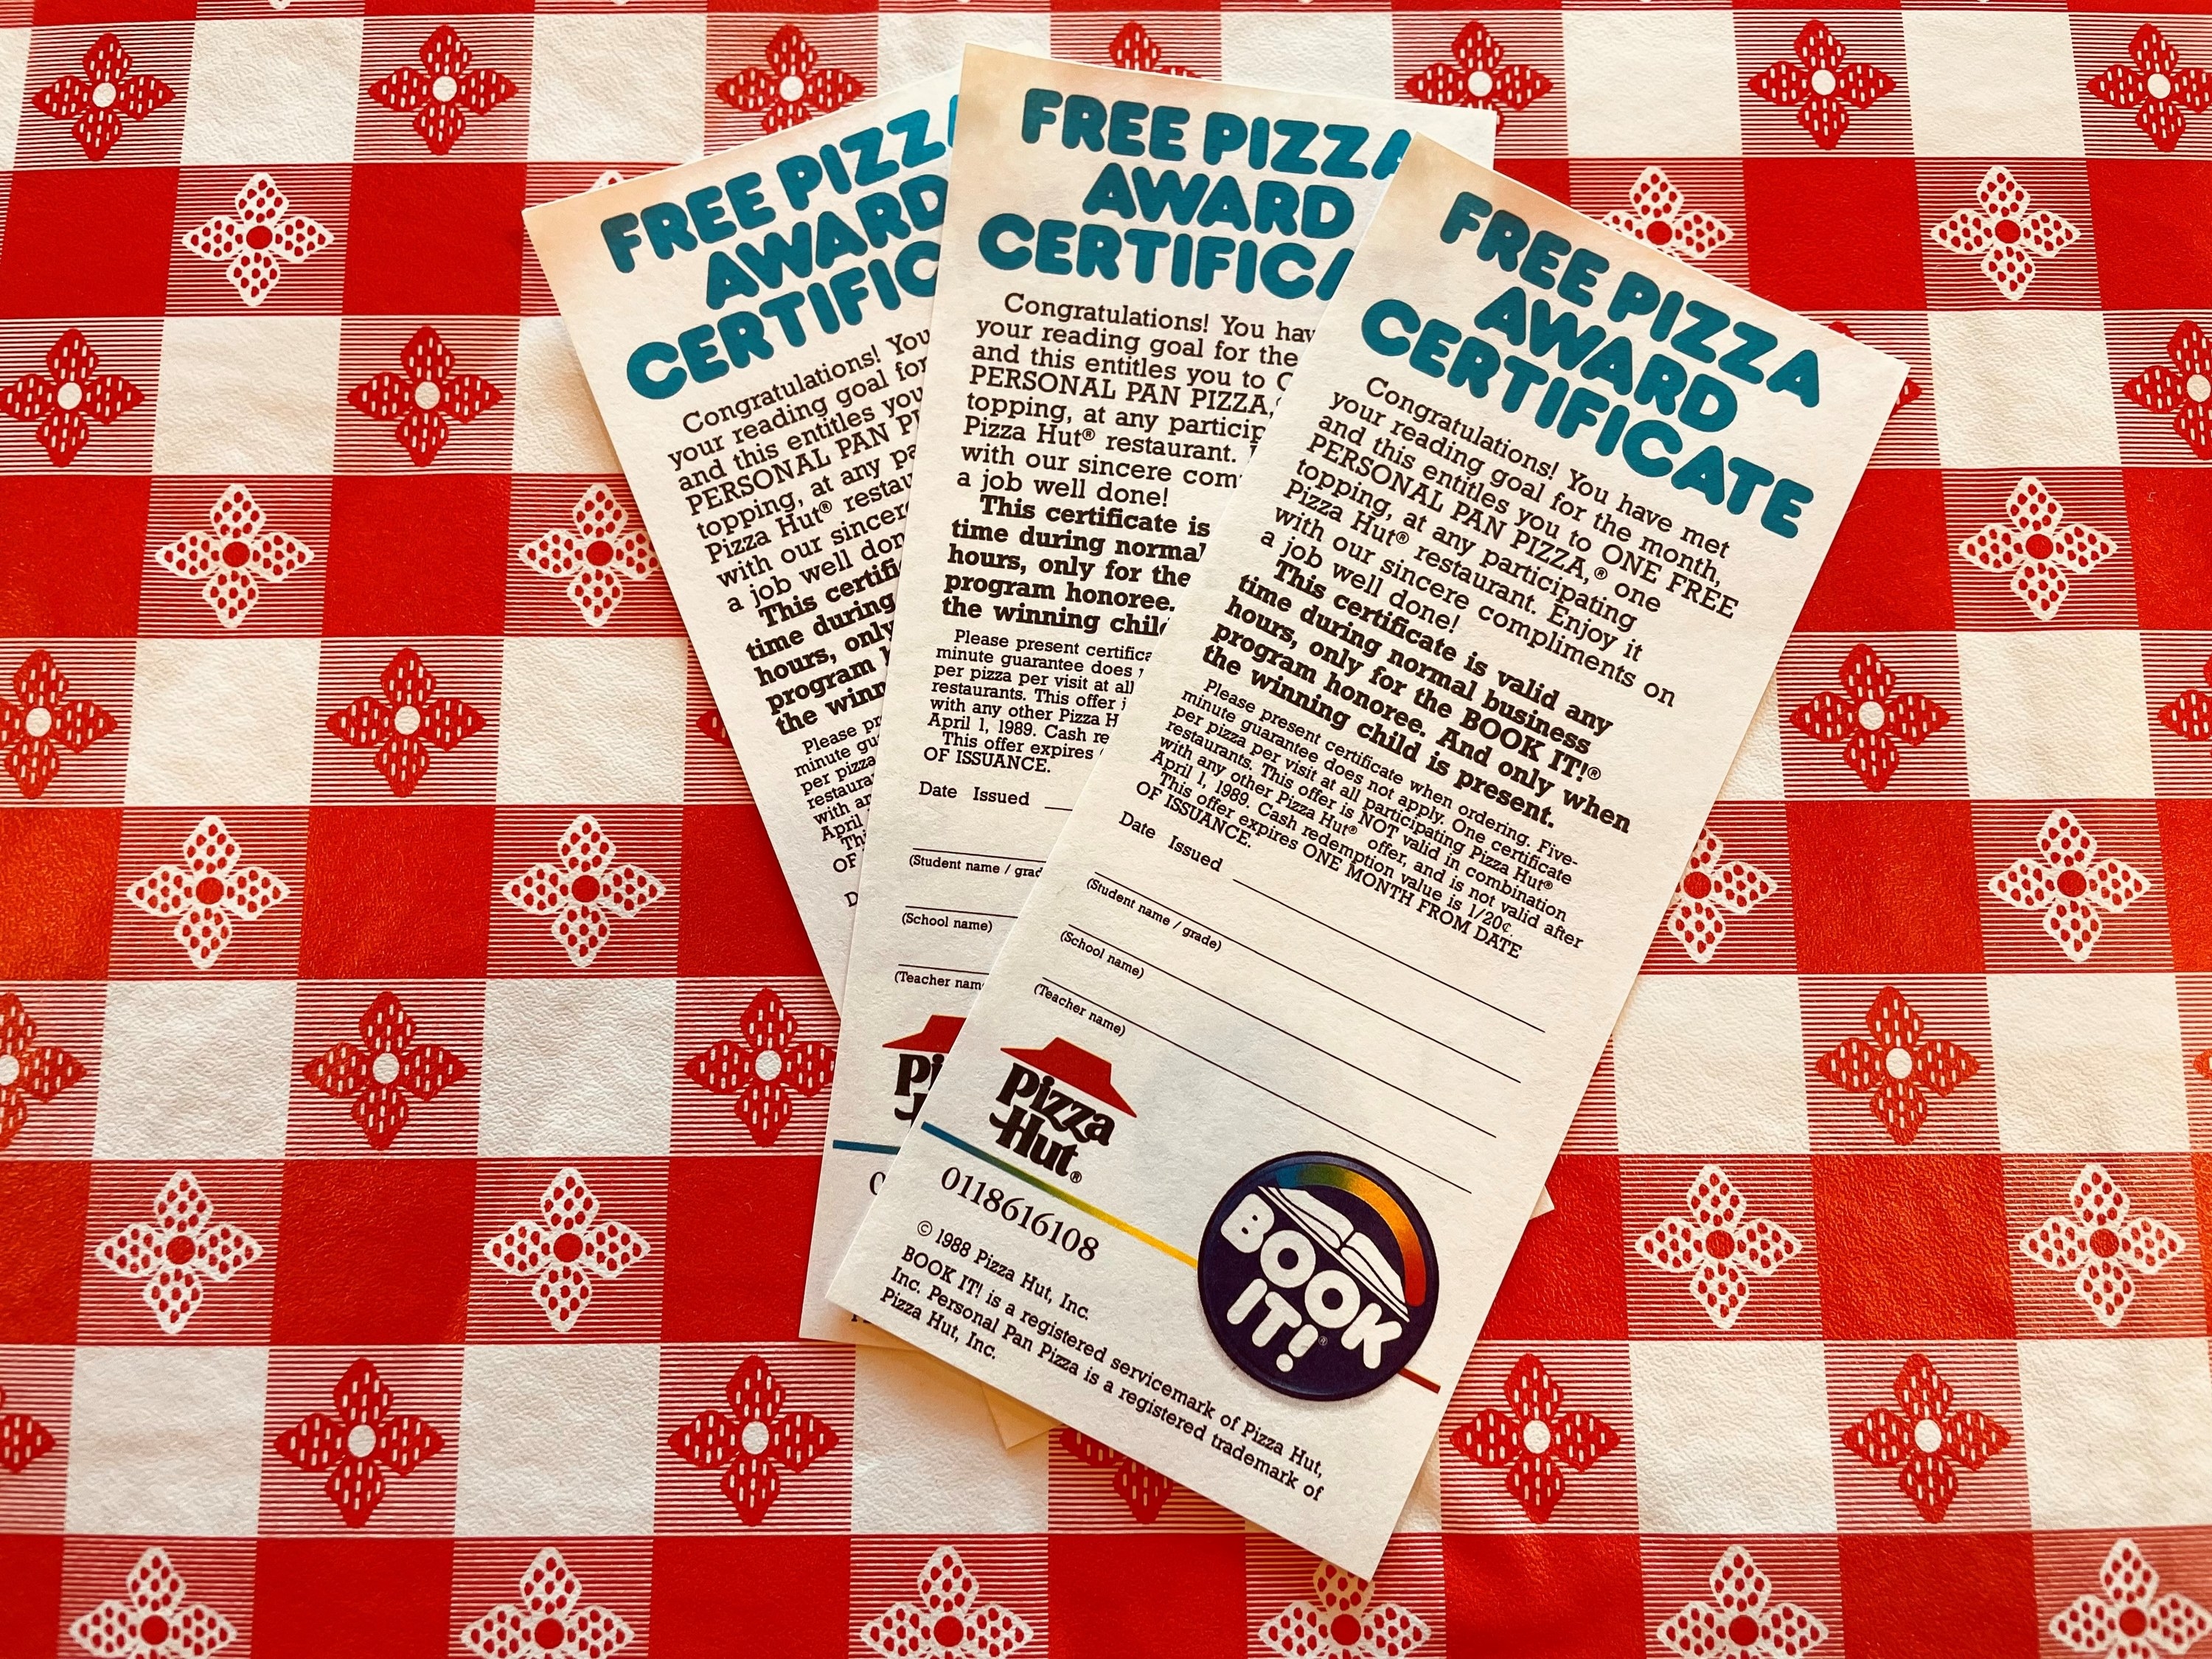 Three Pizza Hut reading award certificates fanned out on a checked tablecloth